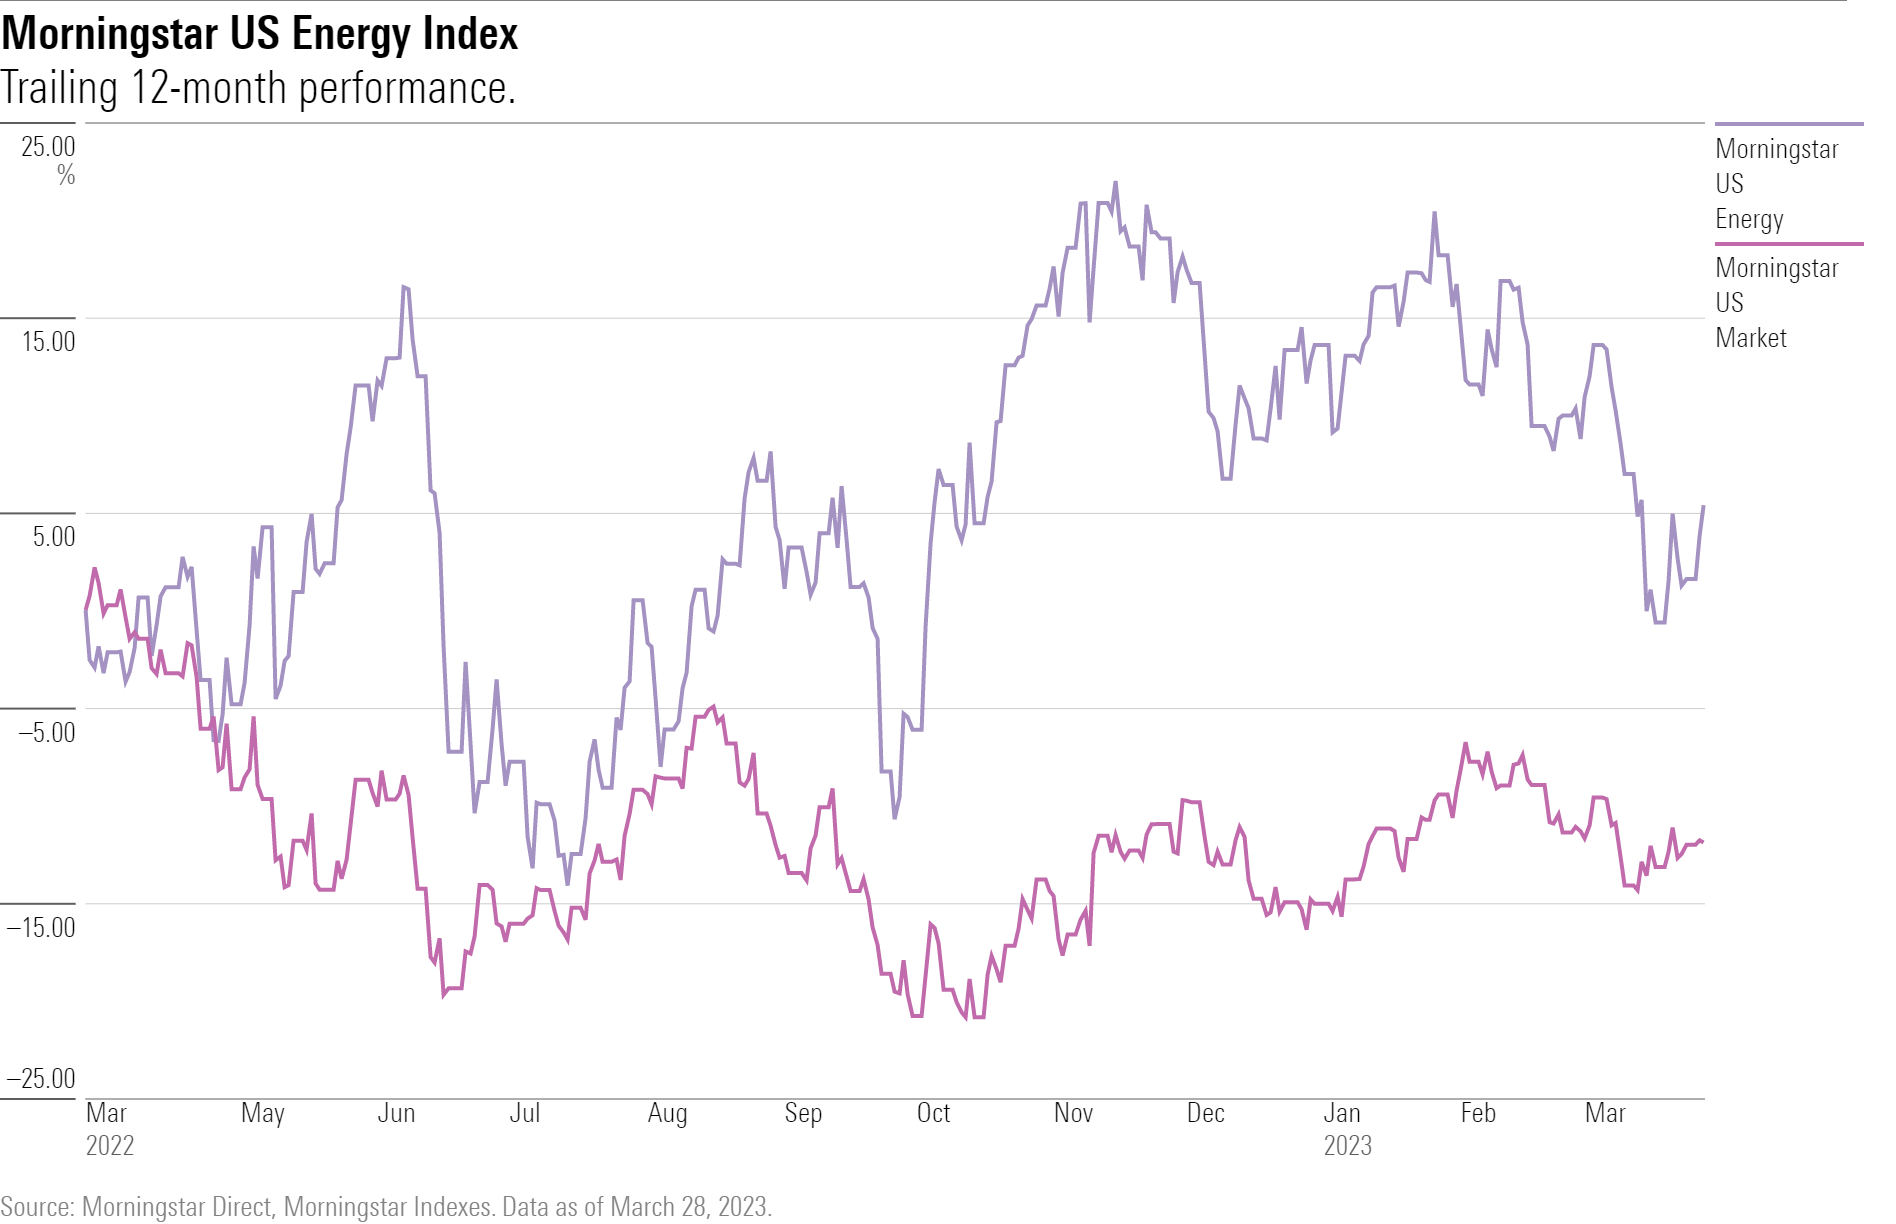 Line chart of the trailing 12-month performance of the Morningstar US Energy Index compared to the Morningstar US Market Index March 2022-March 2023.